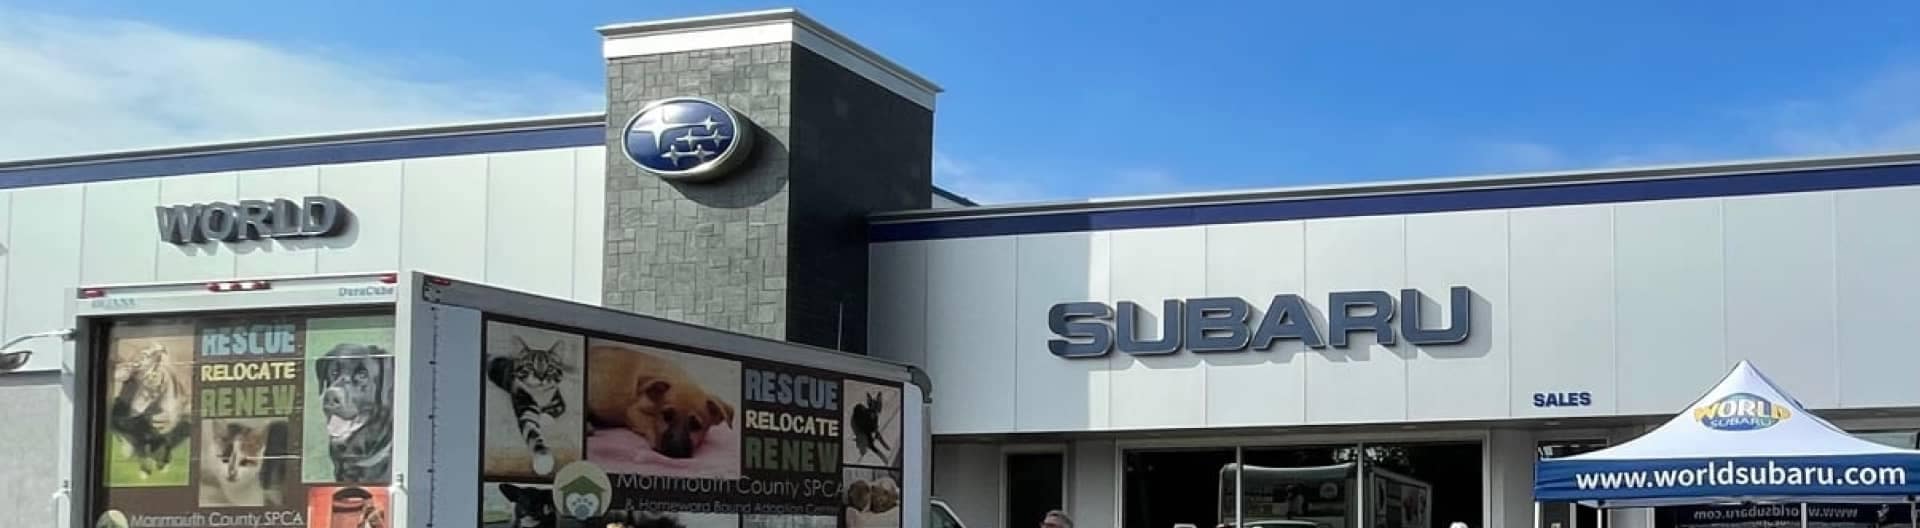 An exterior view of the top of a Subaru Dealership Building